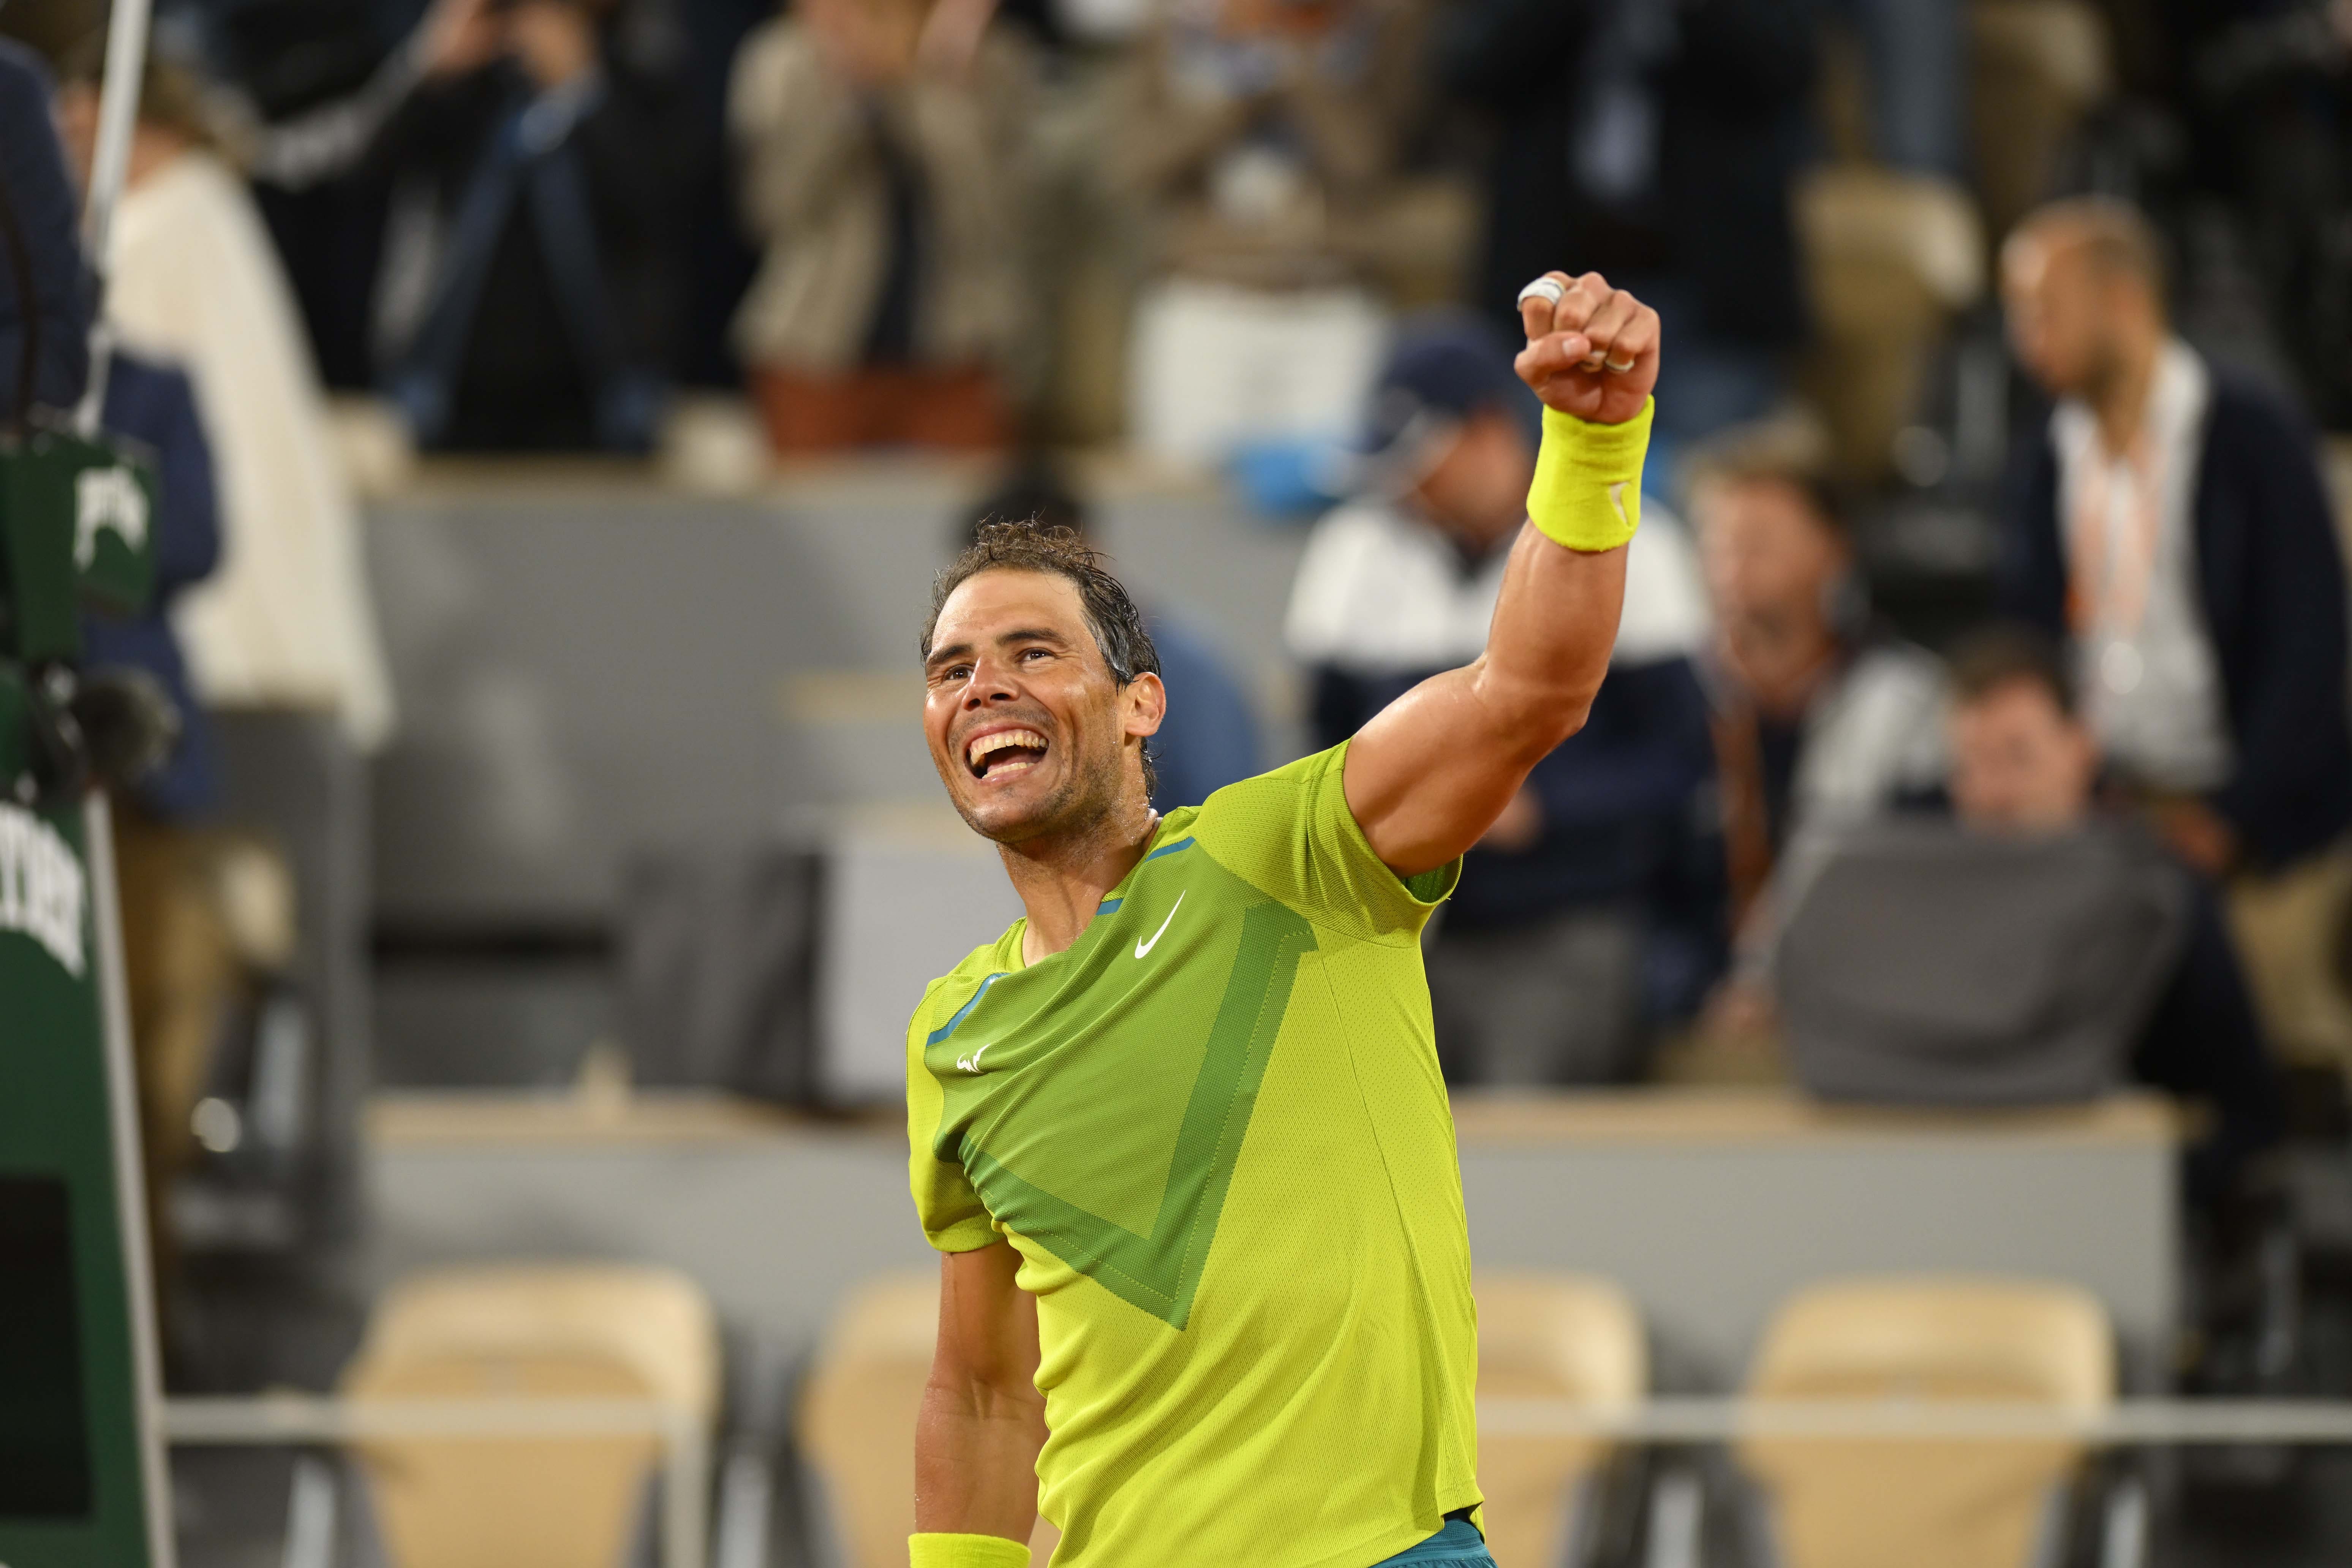 Nadal dashes home hopes for 300th Slam match win